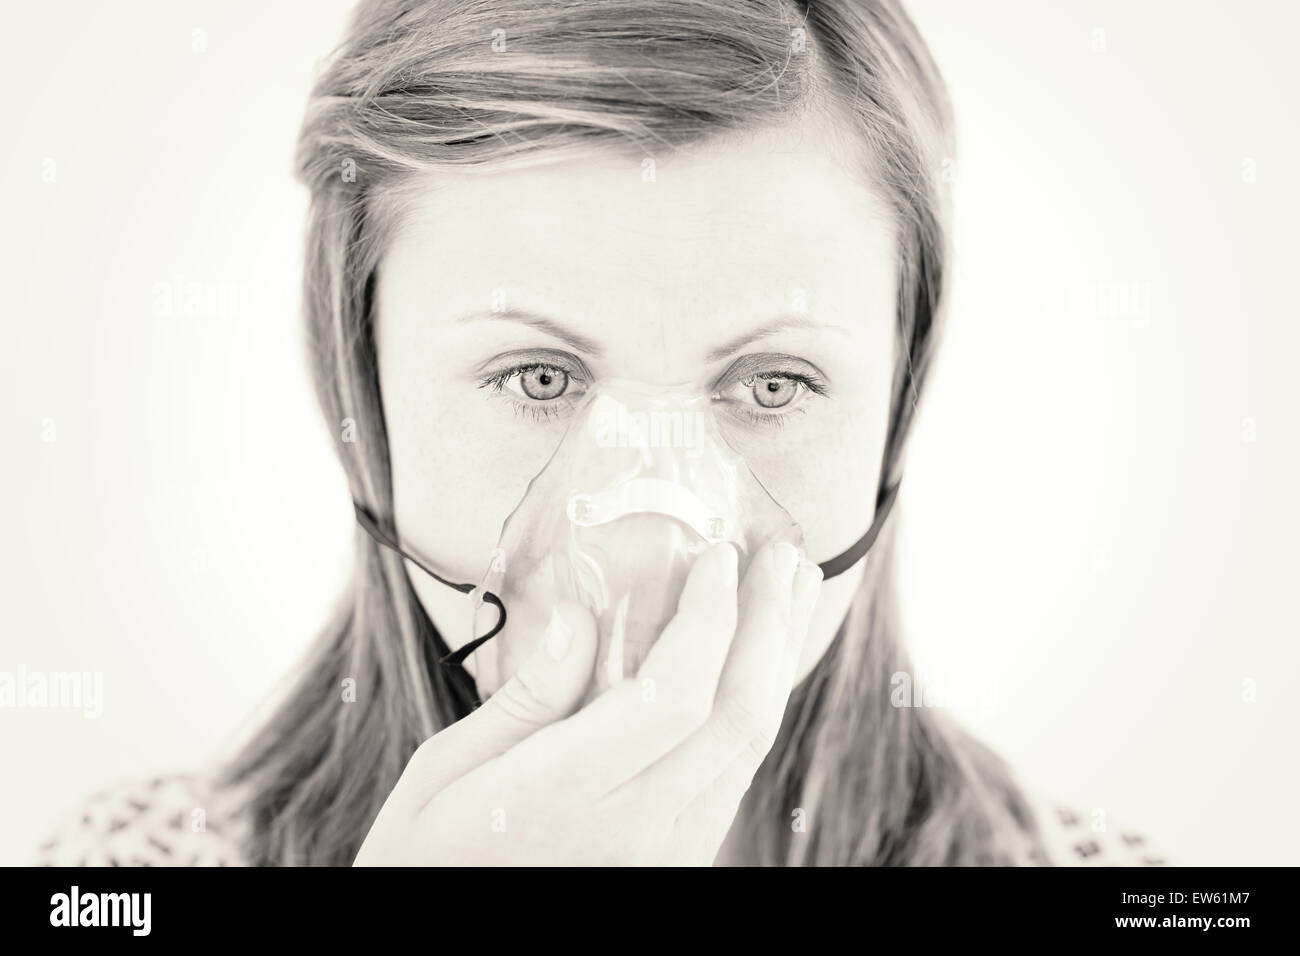 Diseased young woman wearing a mask Stock Photo